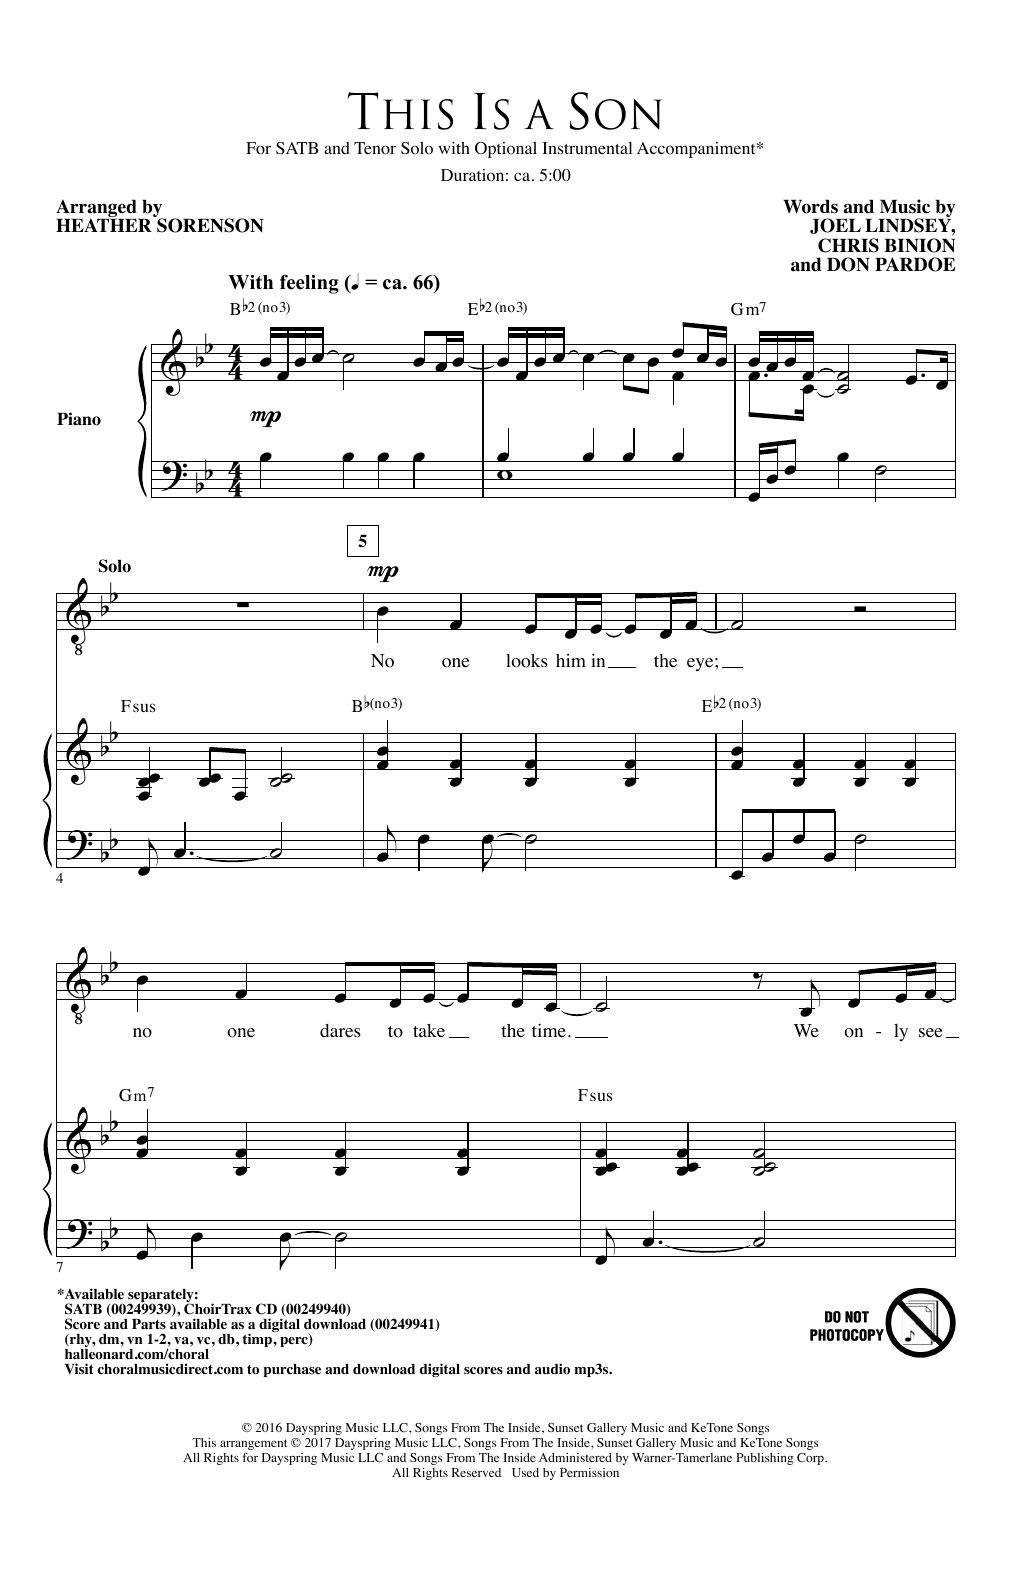 Download Heather Sorenson This Is A Son Sheet Music